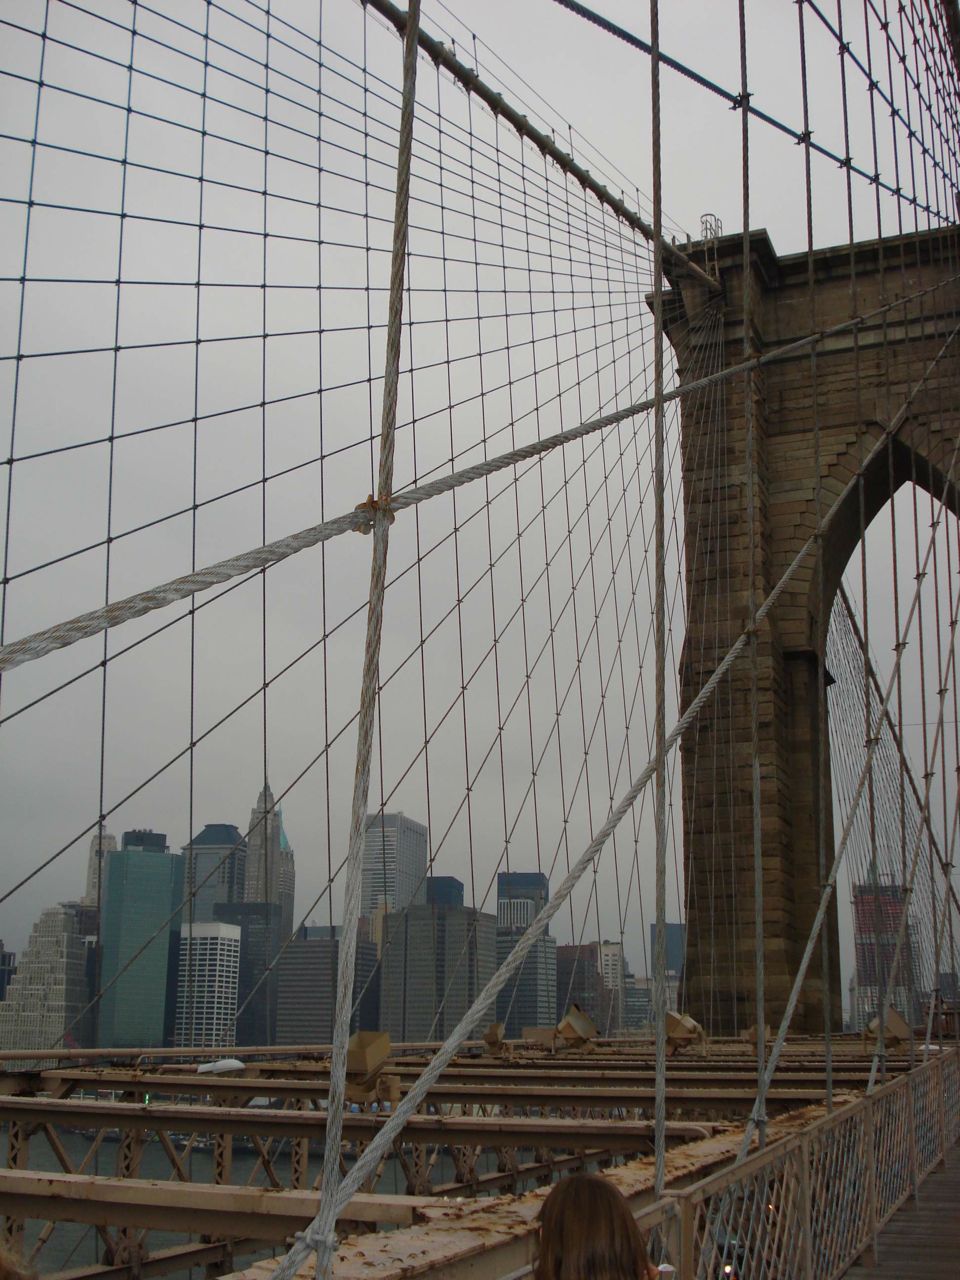 You are currently viewing <!--:en-->Brooklyn Bridge inspirational<!--:-->